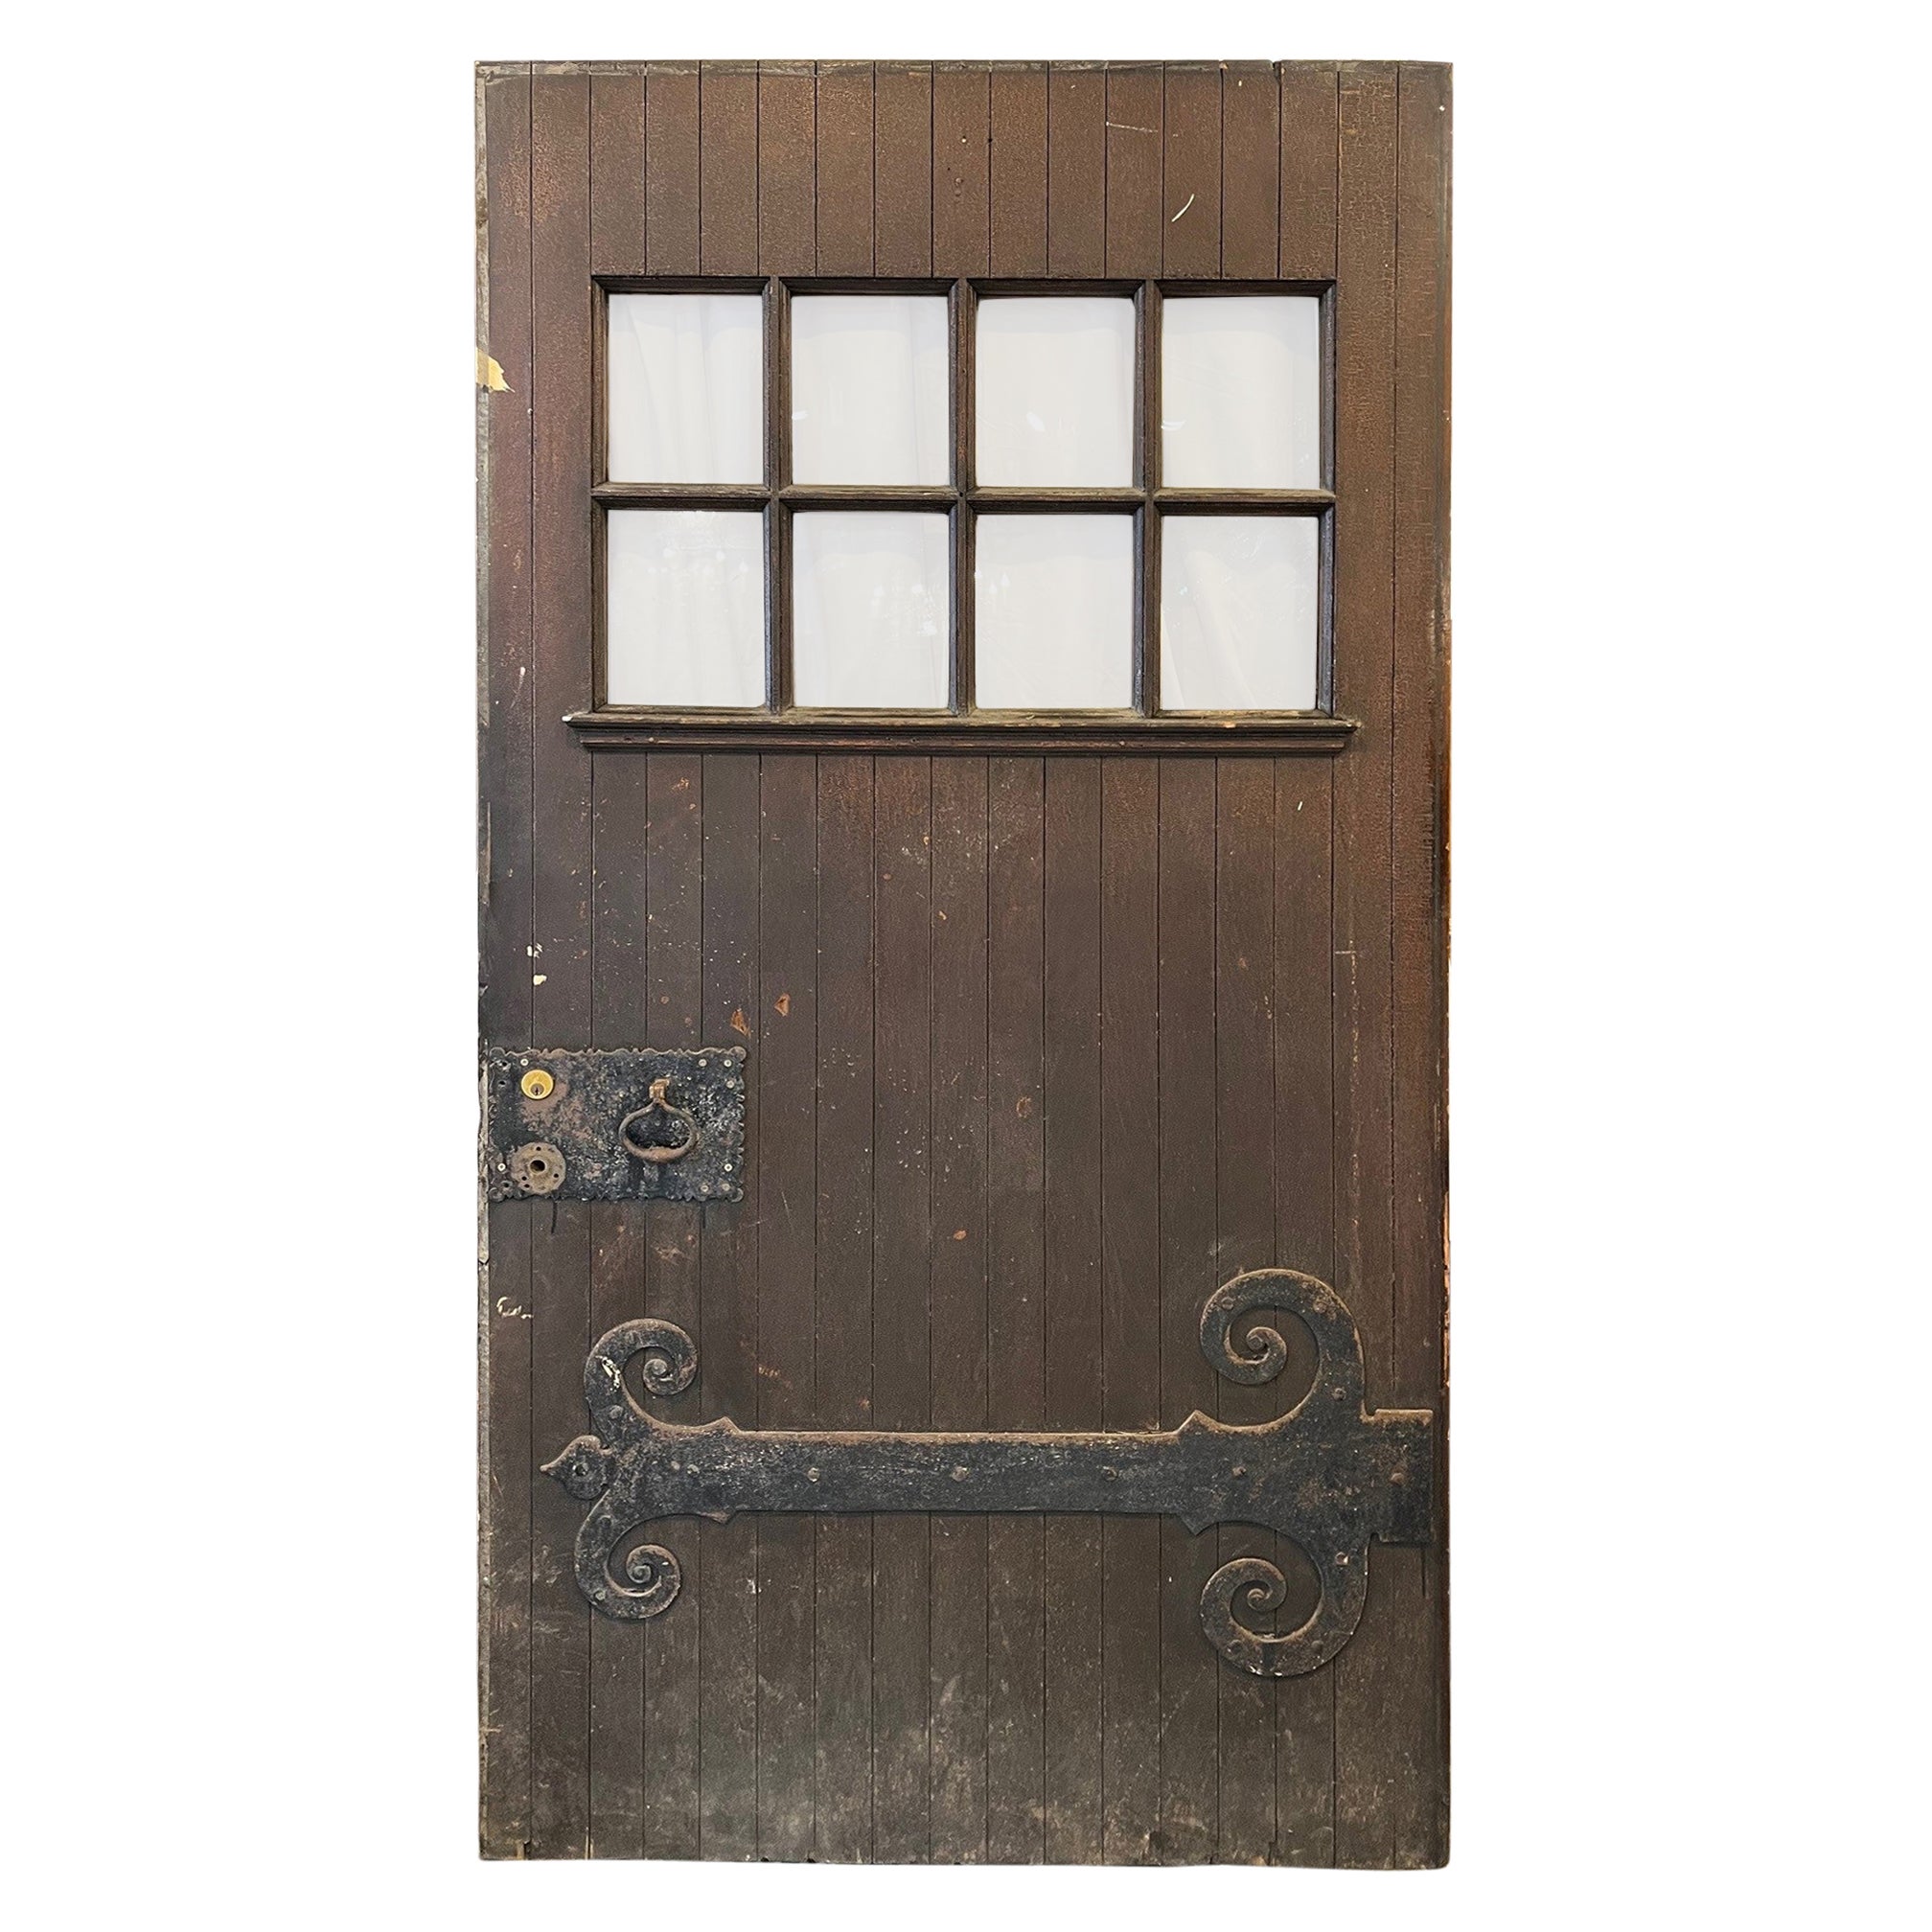 Early 20th Century Antique Oversize Door with Large Iron Hinge